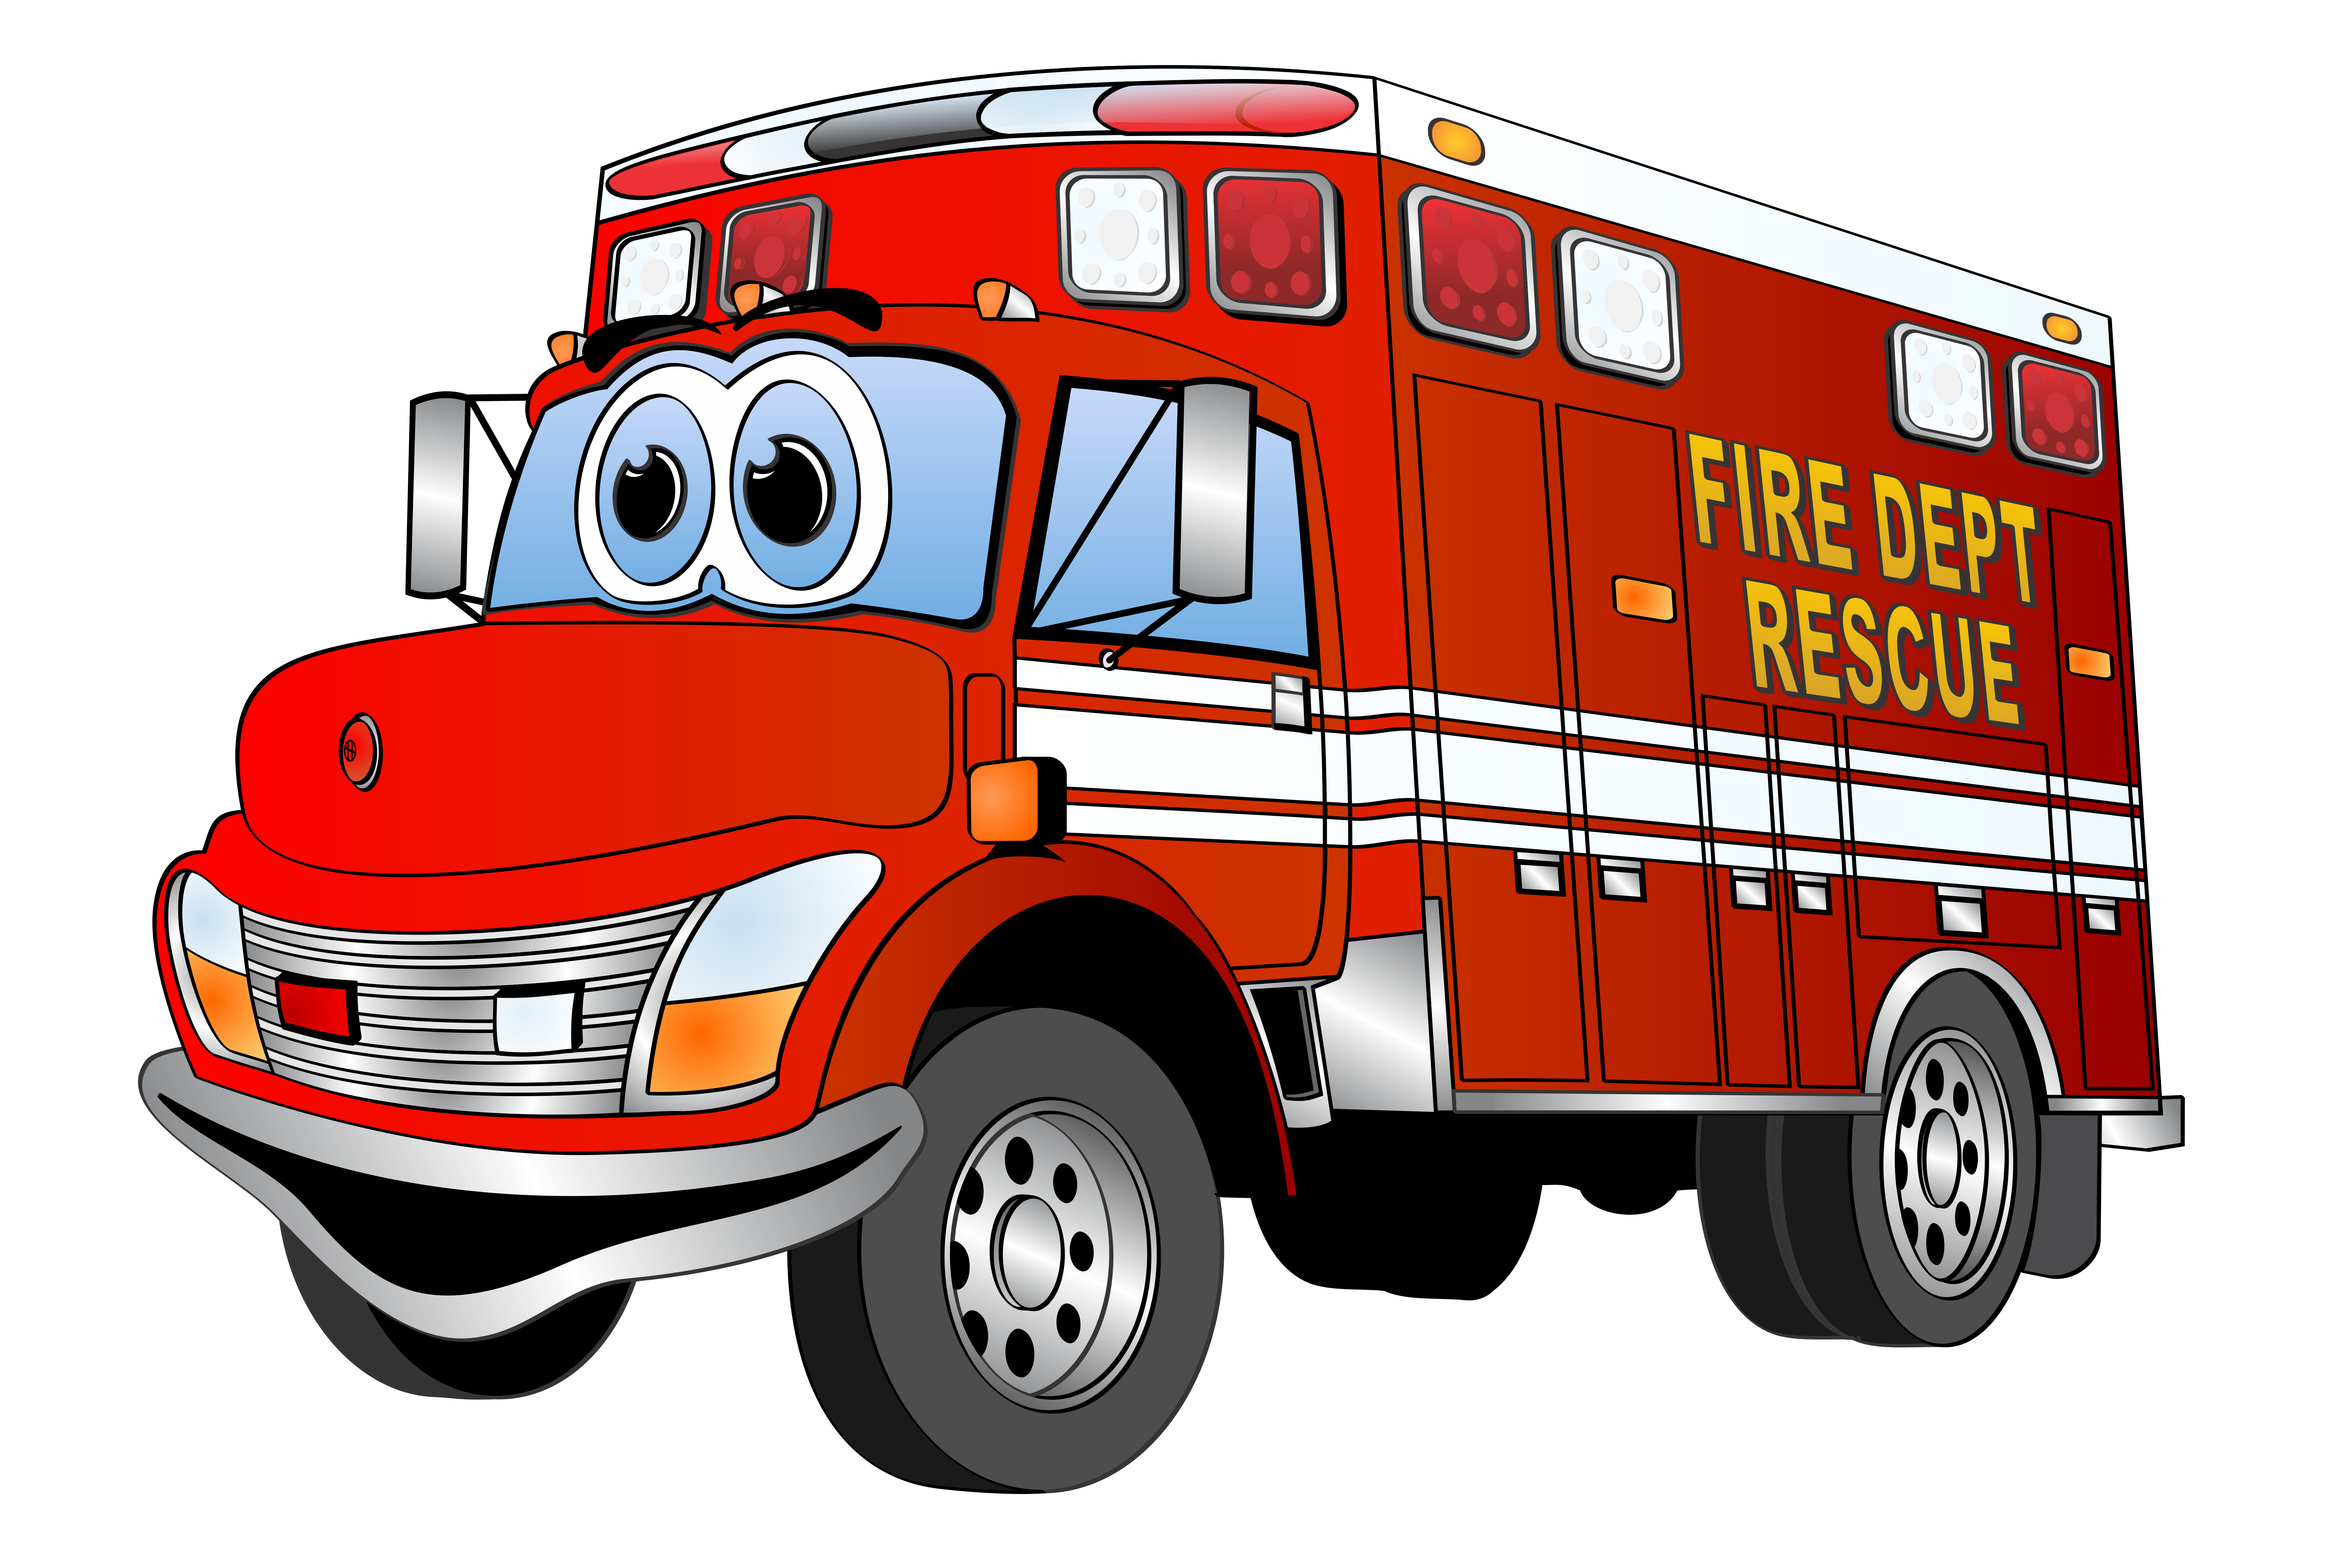  collection of free. Firetruck clipart fire prevention